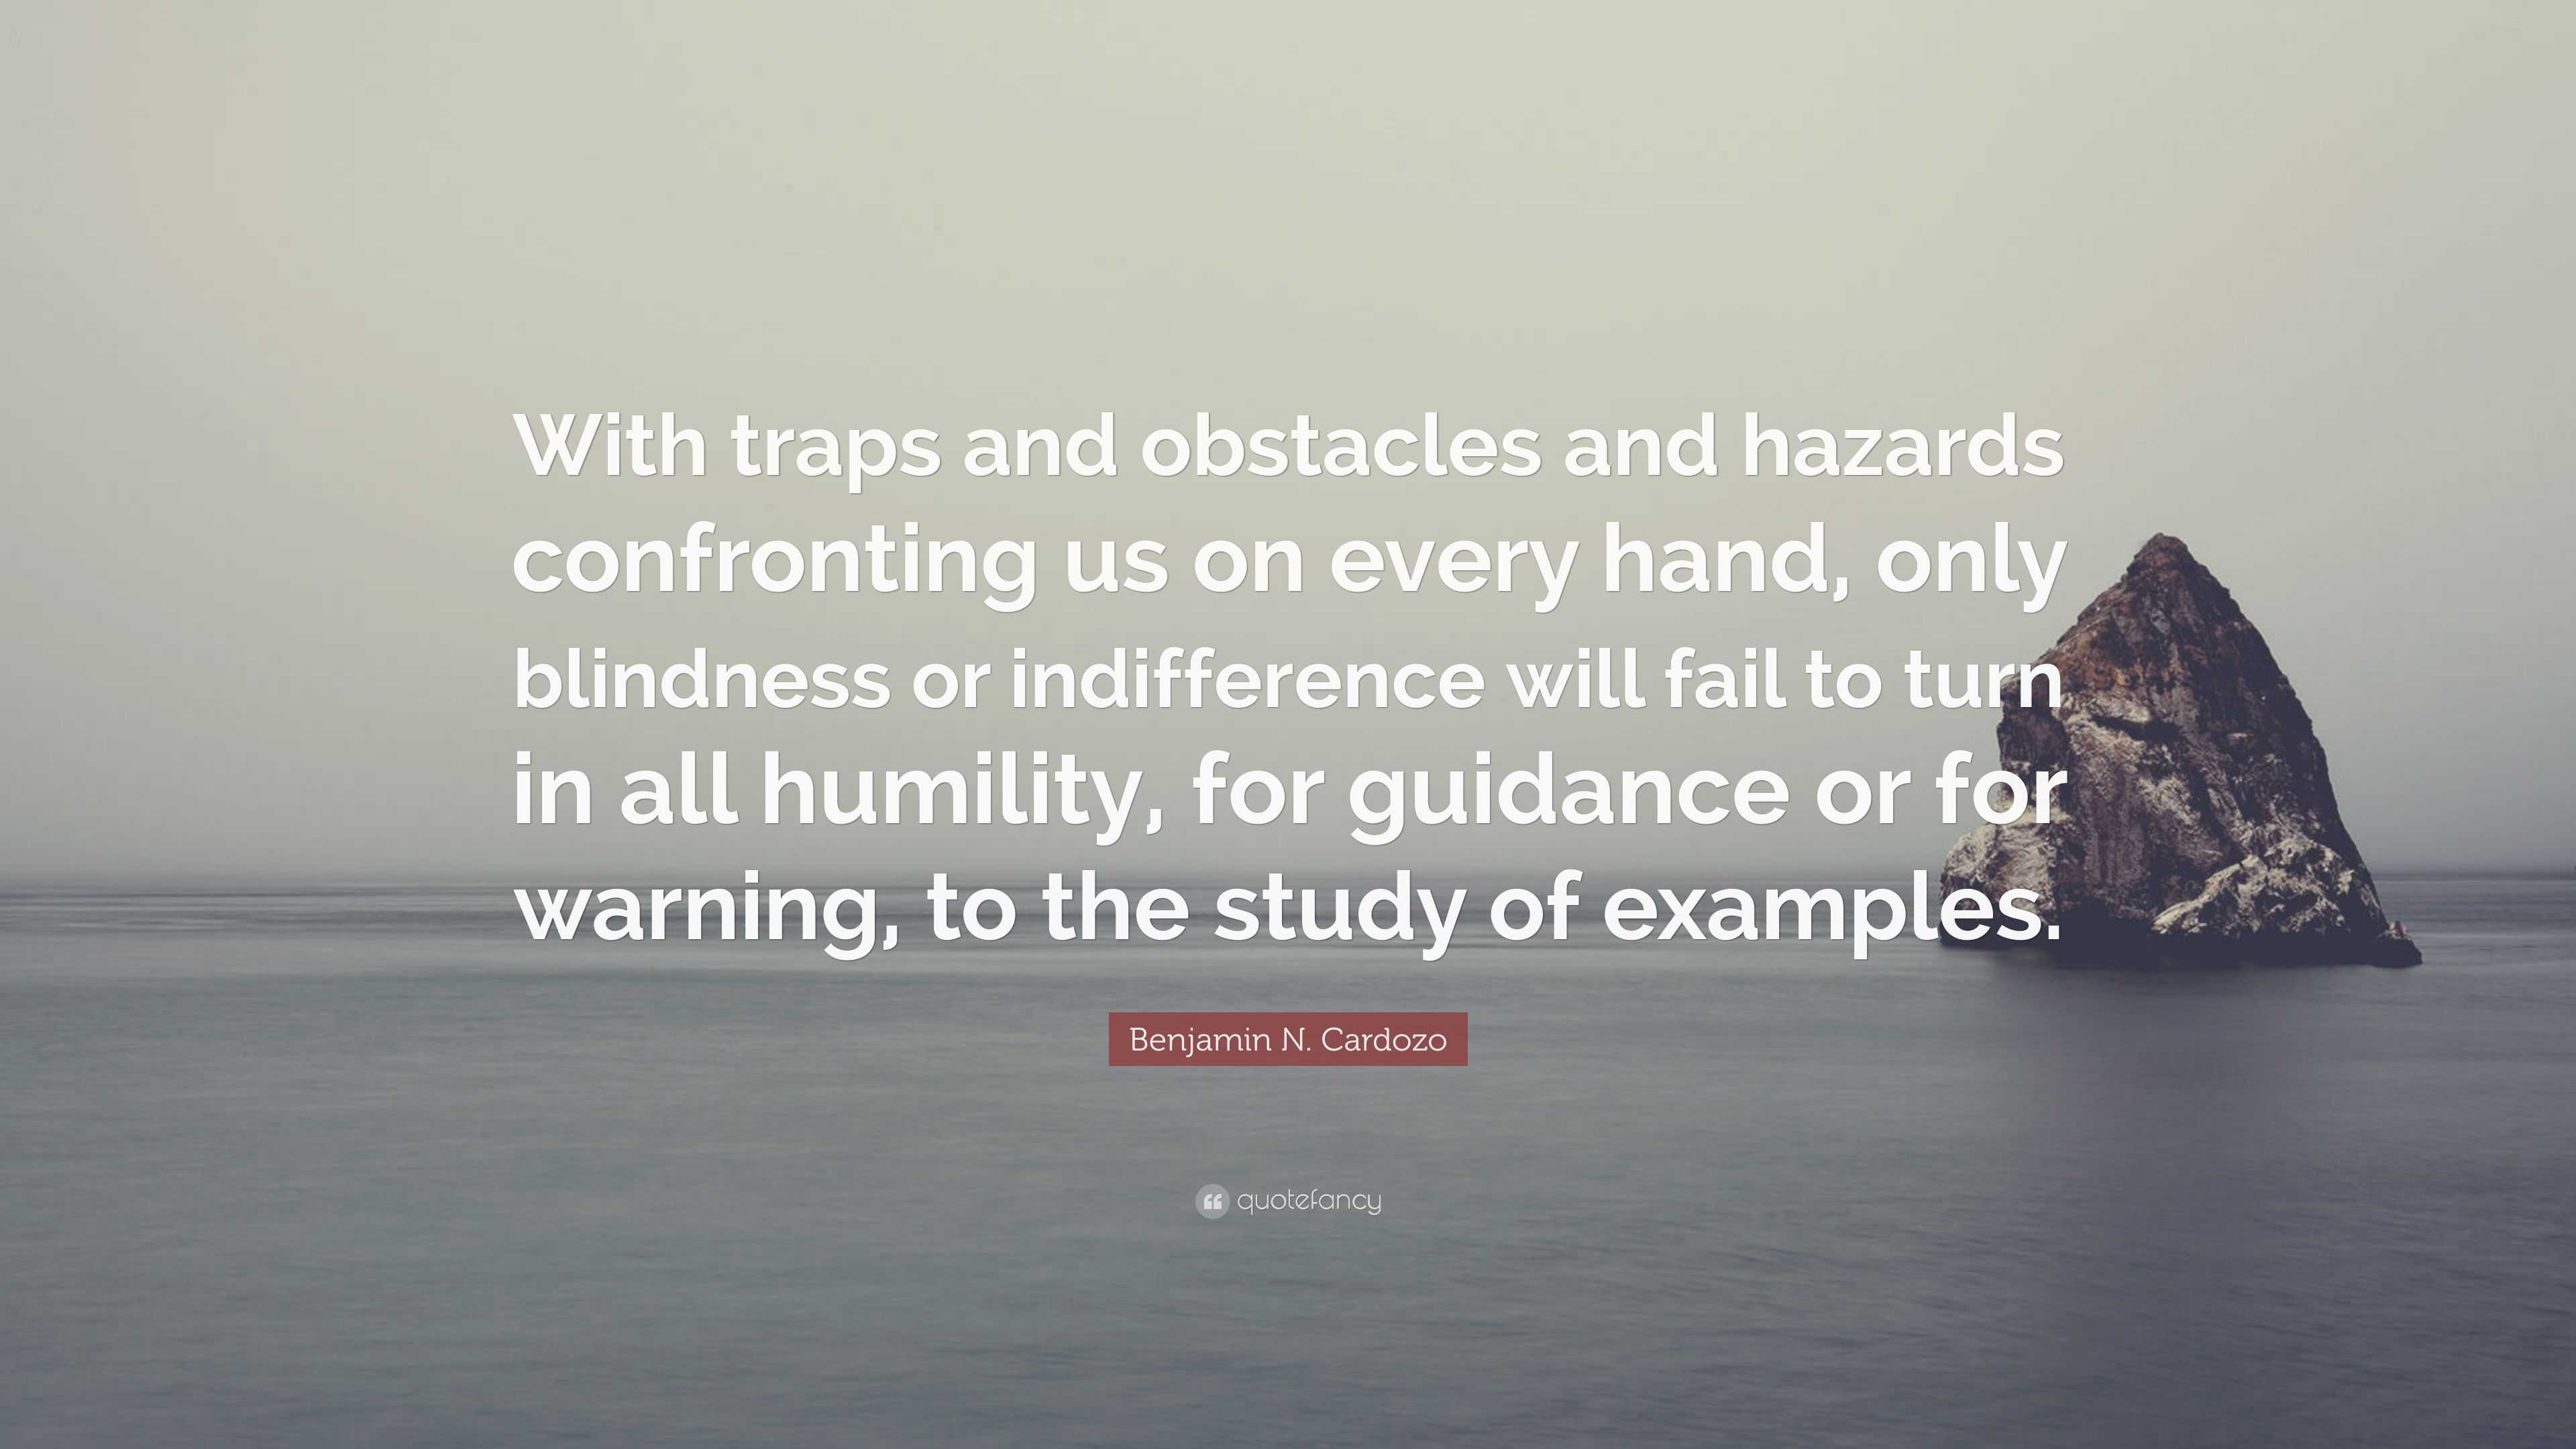 Benjamin N. Cardozo Quote: “With traps and obstacles and hazards